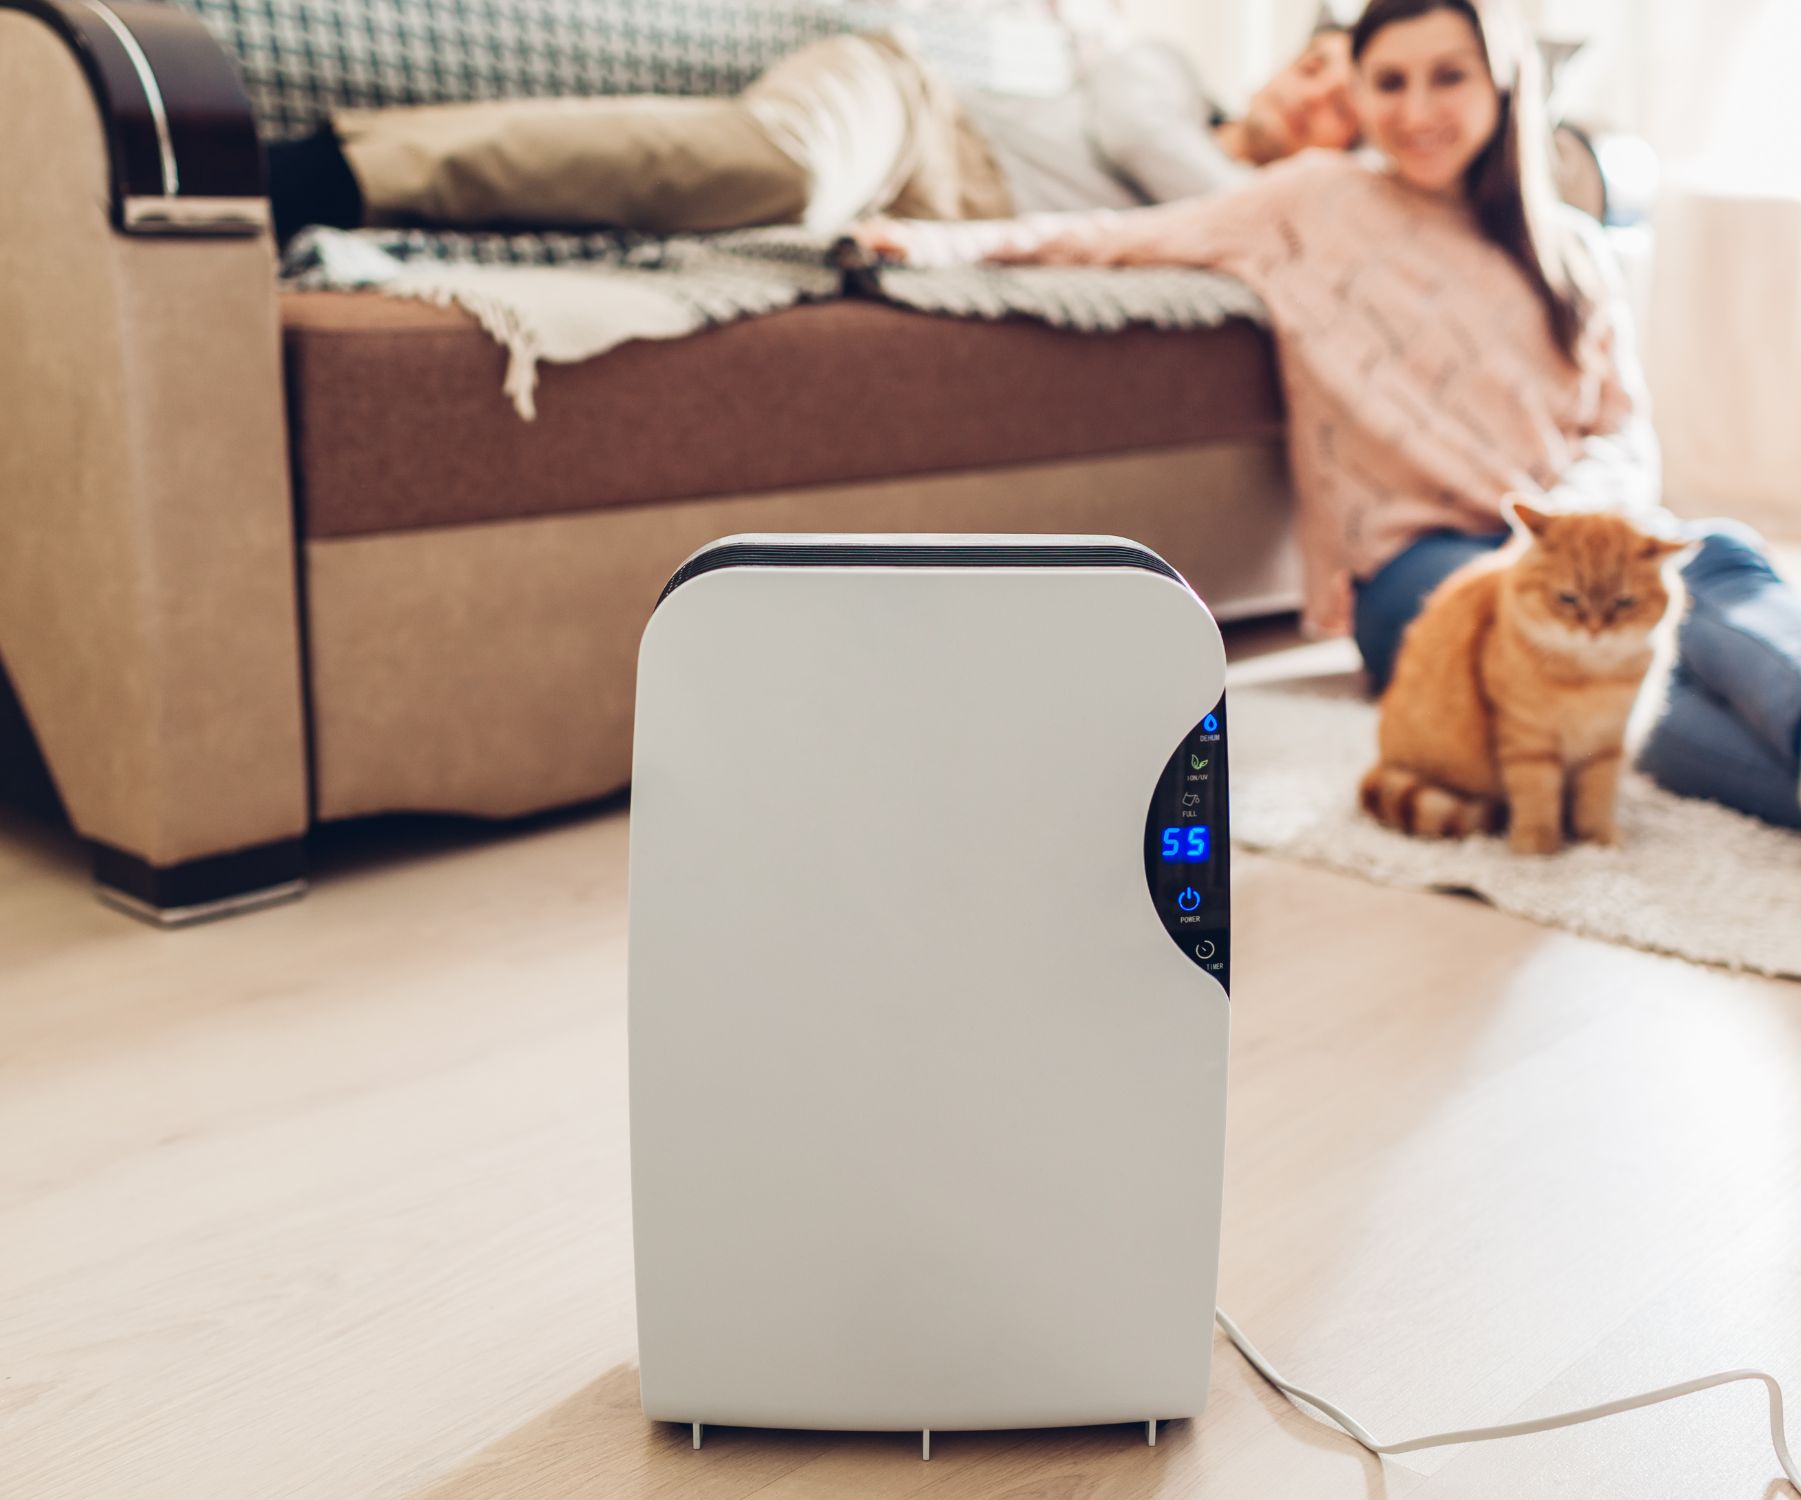 What's The Best Place To Put A Dehumidifier In A House?